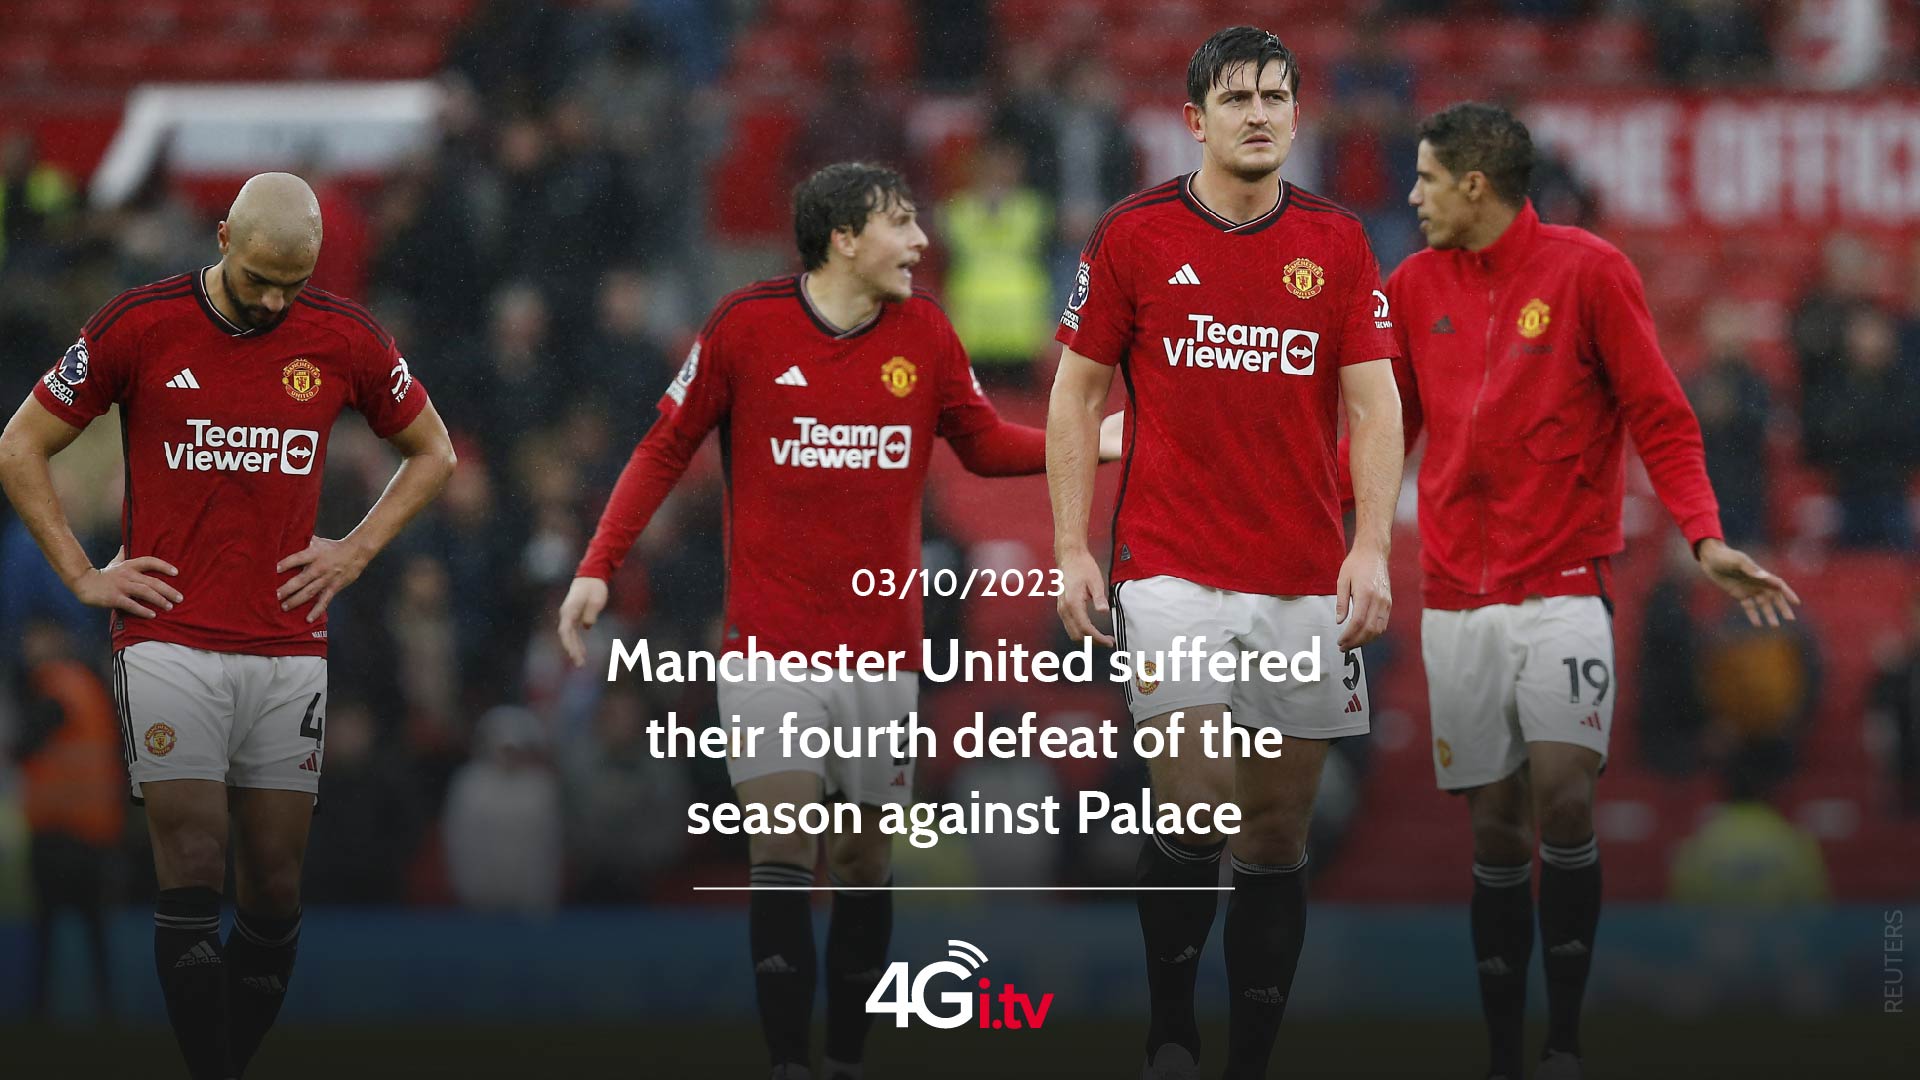 Lee más sobre el artículo Manchester United suffered their fourth defeat of the season against Palace